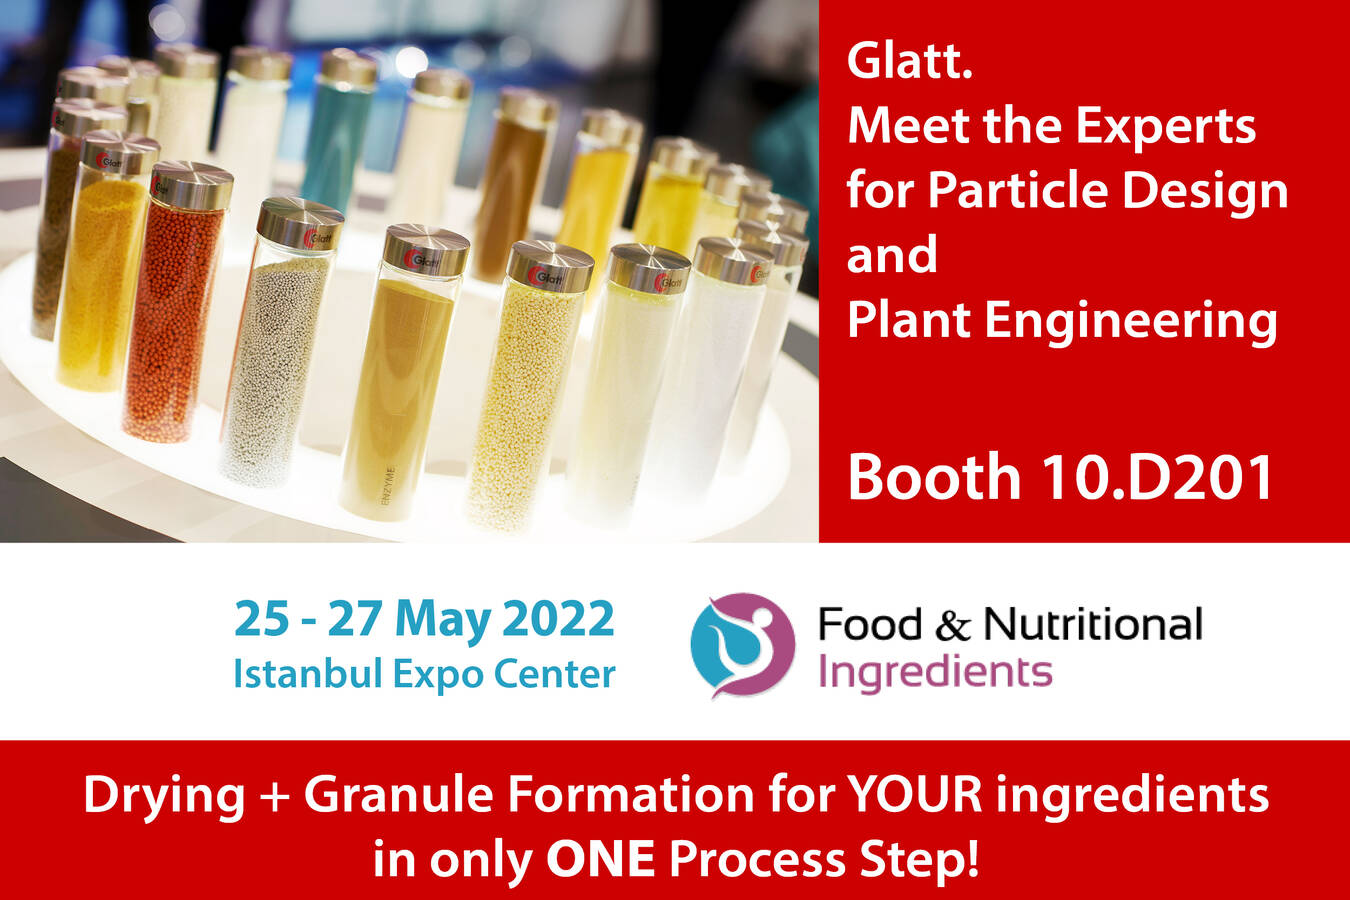 Visit the Glatt experts for particle design, process engineering and plant engineering at Food and Nutritional Ingredients from May 25-27, 2022 at the Istandbul Expo Center in hall 10 at booth D201